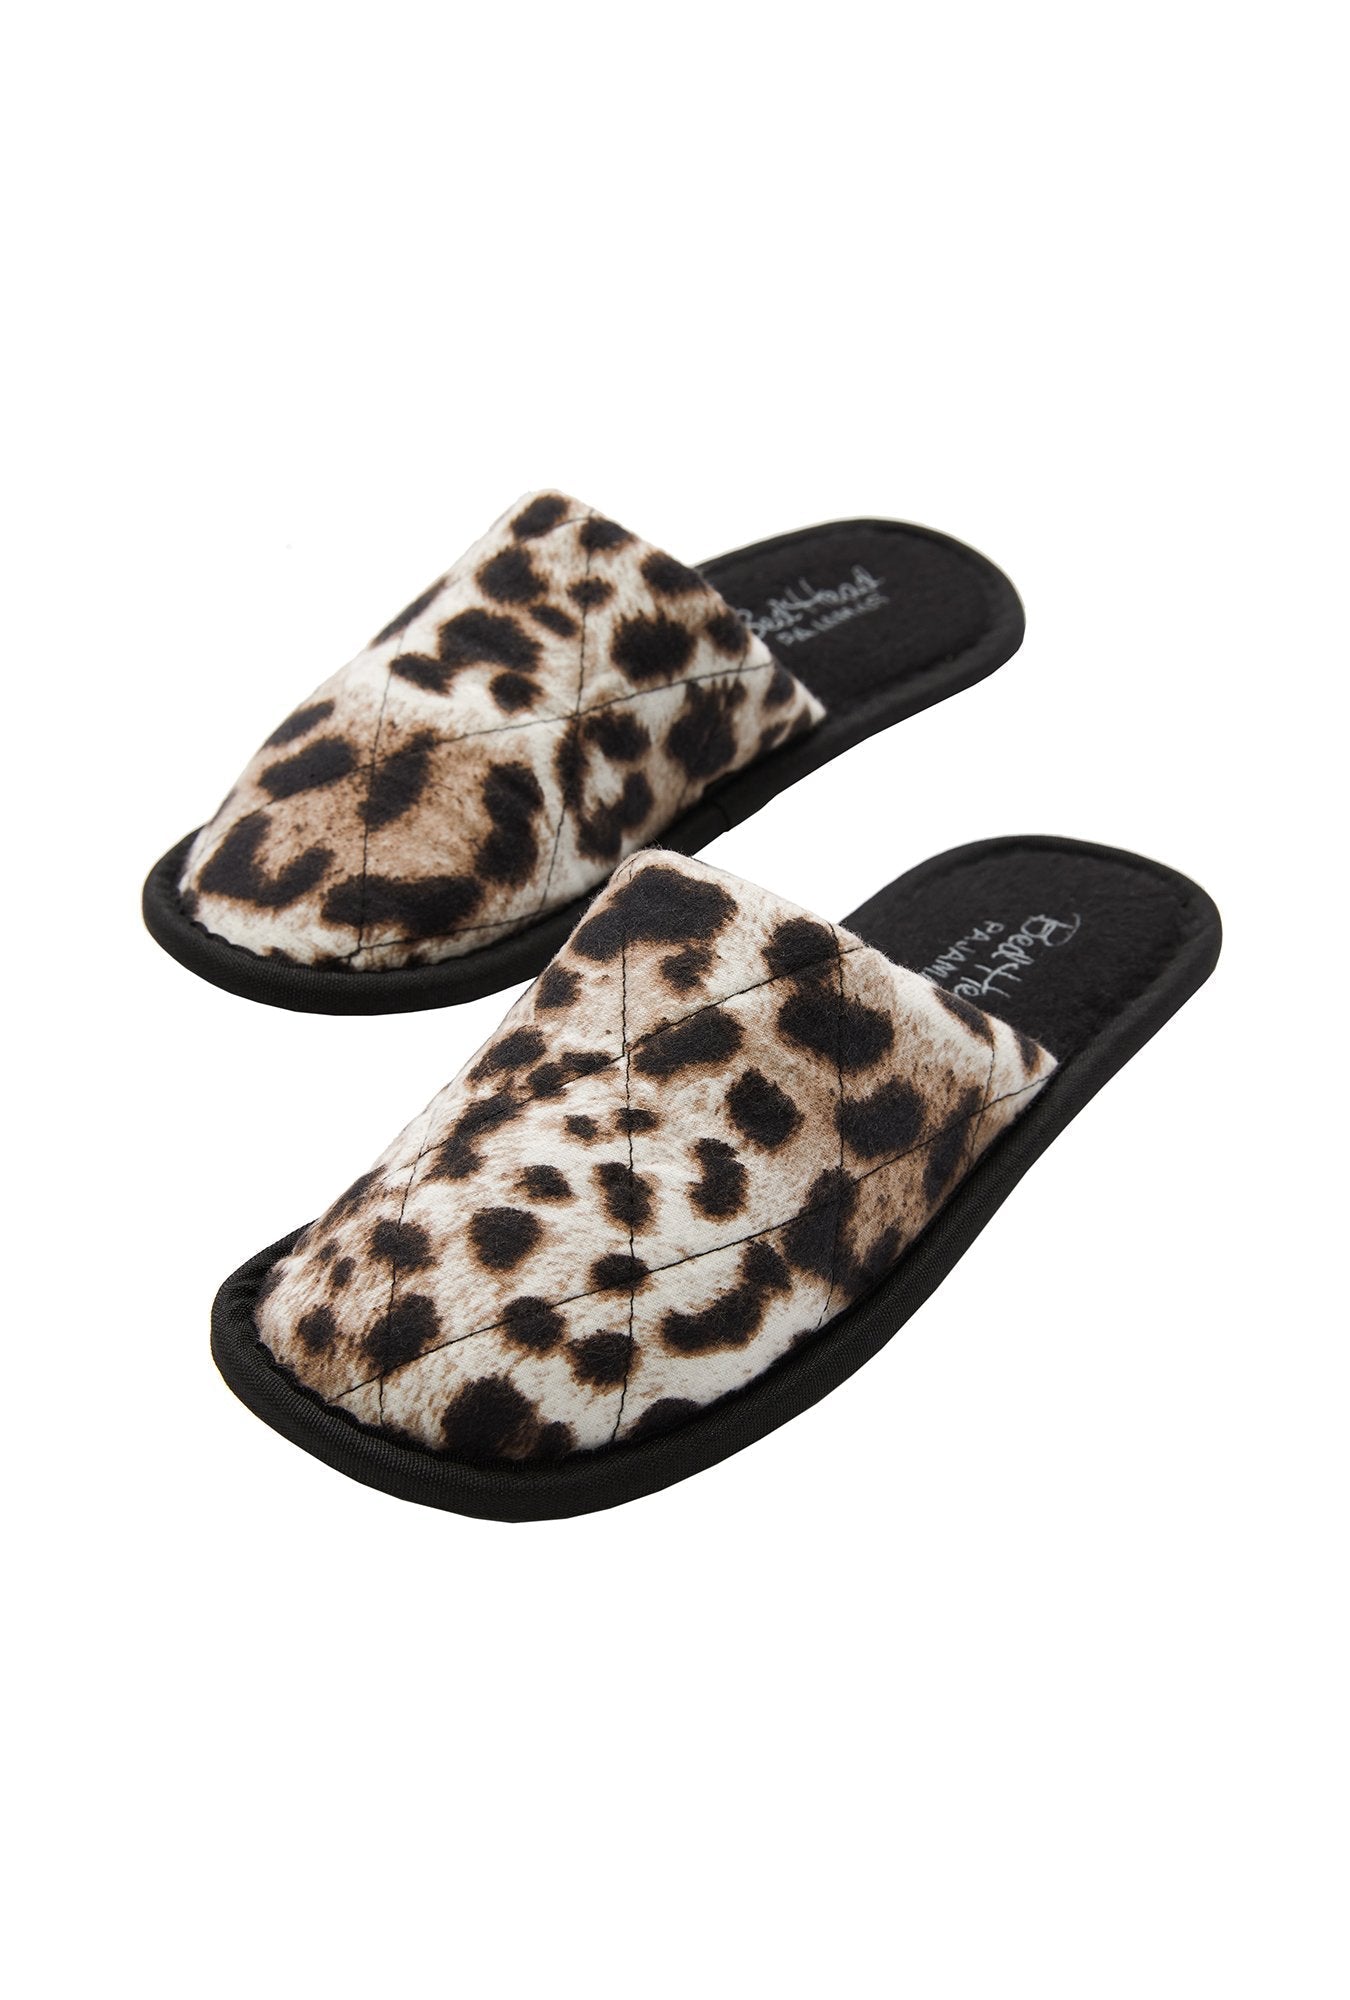 A cotton flannel unisex slippers with cheetah pattern.